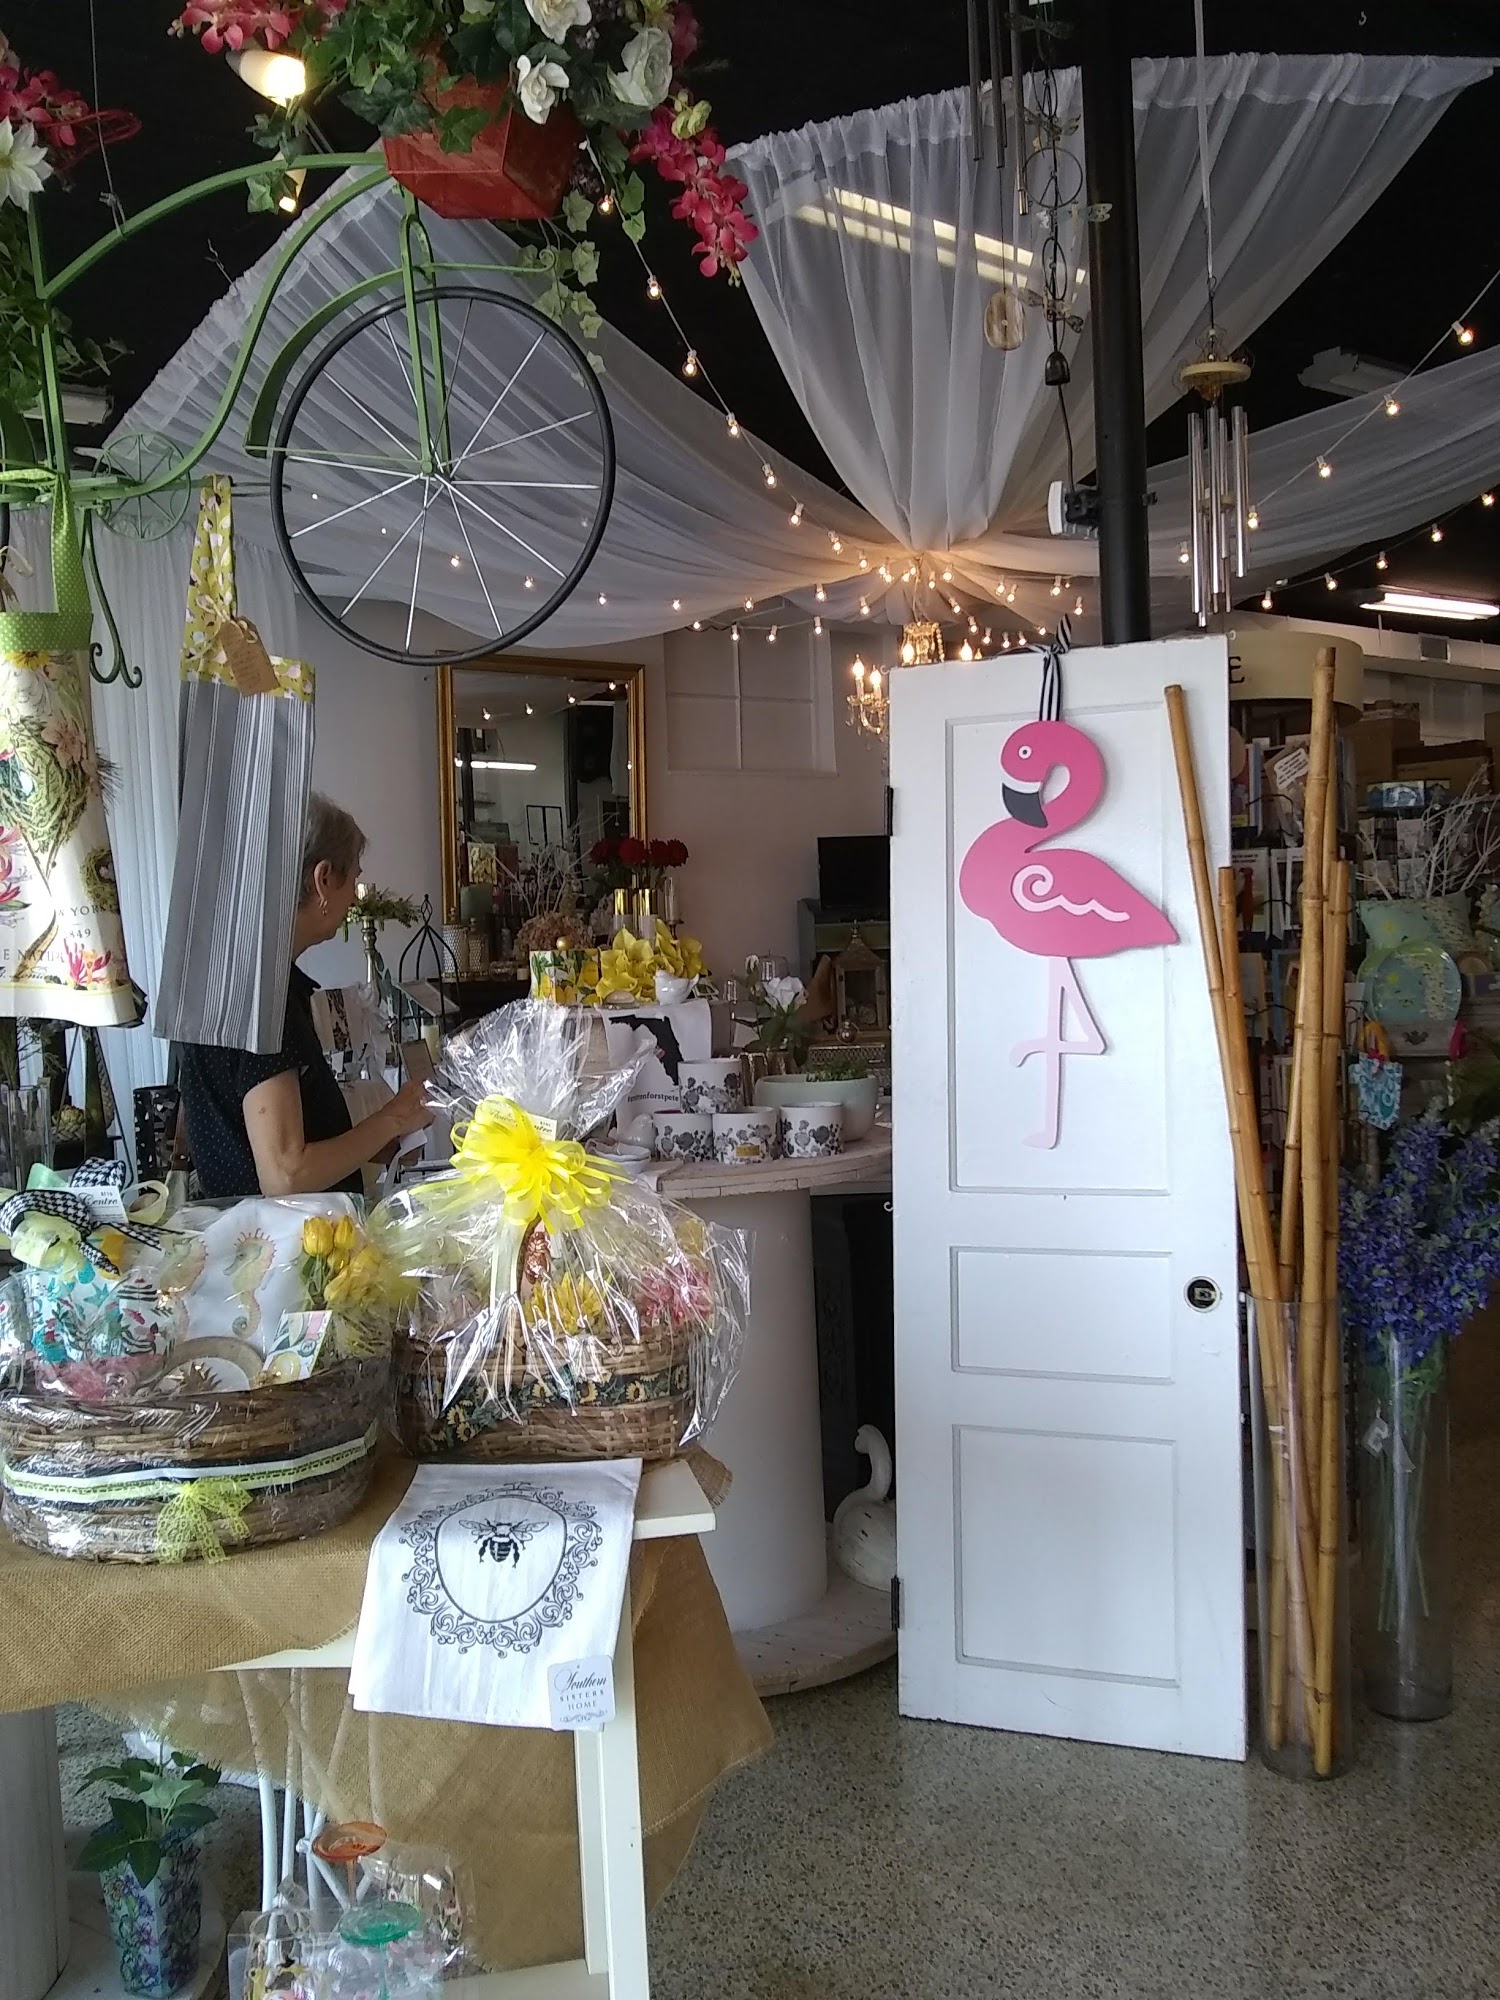 The Flower Centre powered by Lemon Drops Weddings & Events